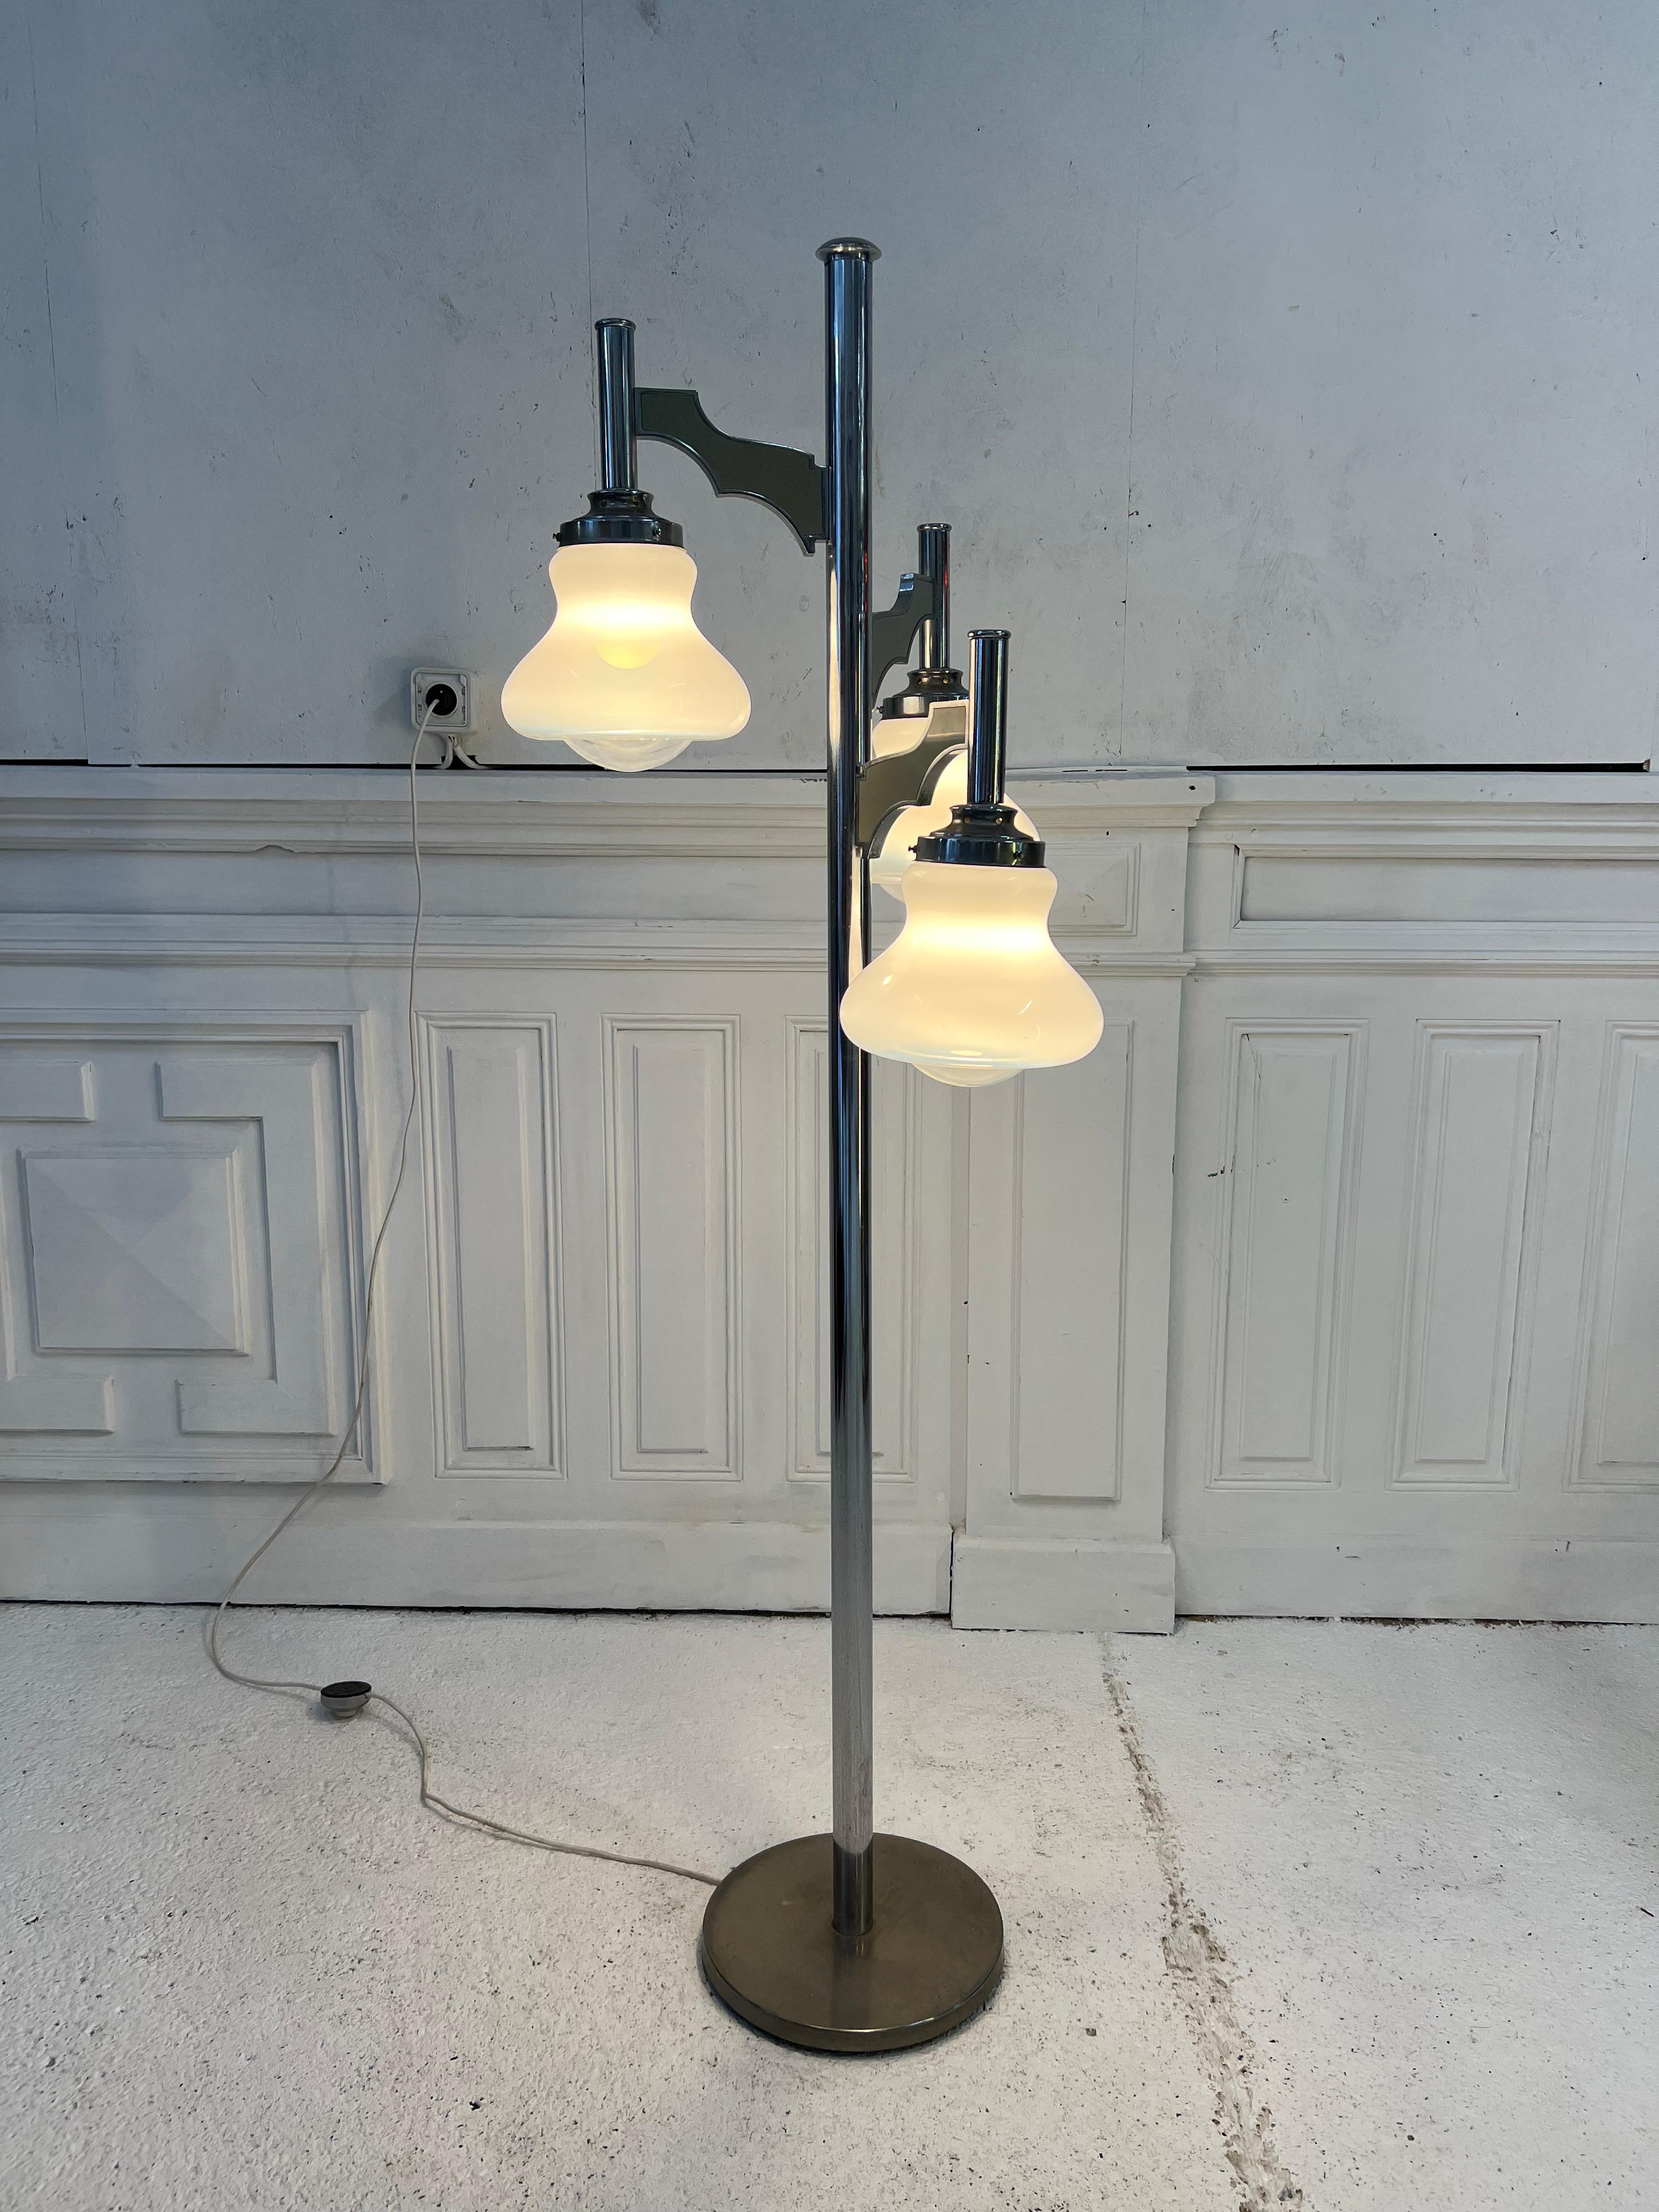 3-light lamp from the 70s by designer Sciolari Italy in chromed metal and Murano glass
its 70s look and its wasp waist will make it easier to find a nice place in your interior
Gaetano Sciolari
ITALIAN, 1927-1994
The work of famous mid-century